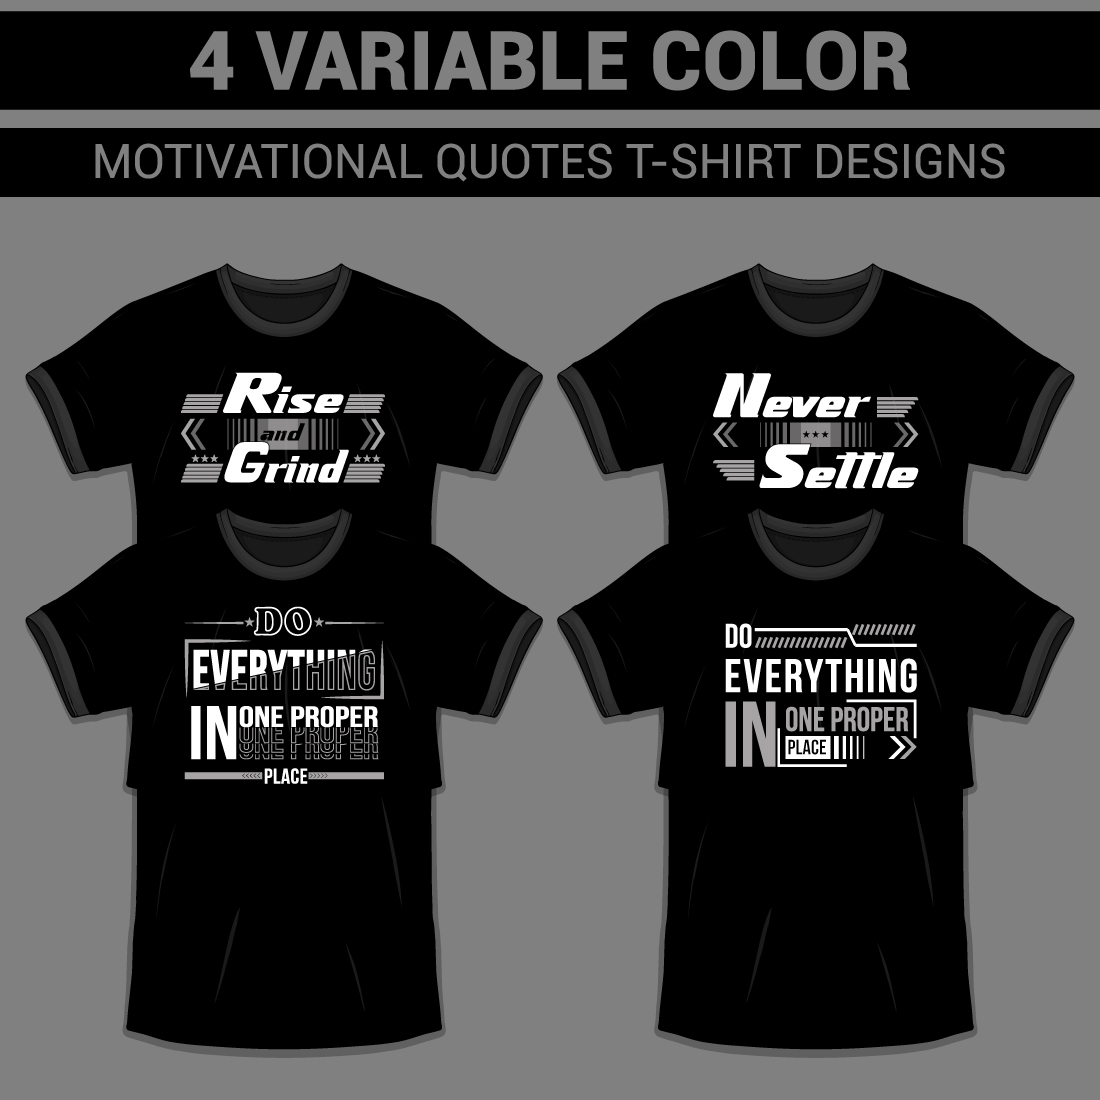 4 Variable Color Motivational Quotes T-Shirt Designs preview image.